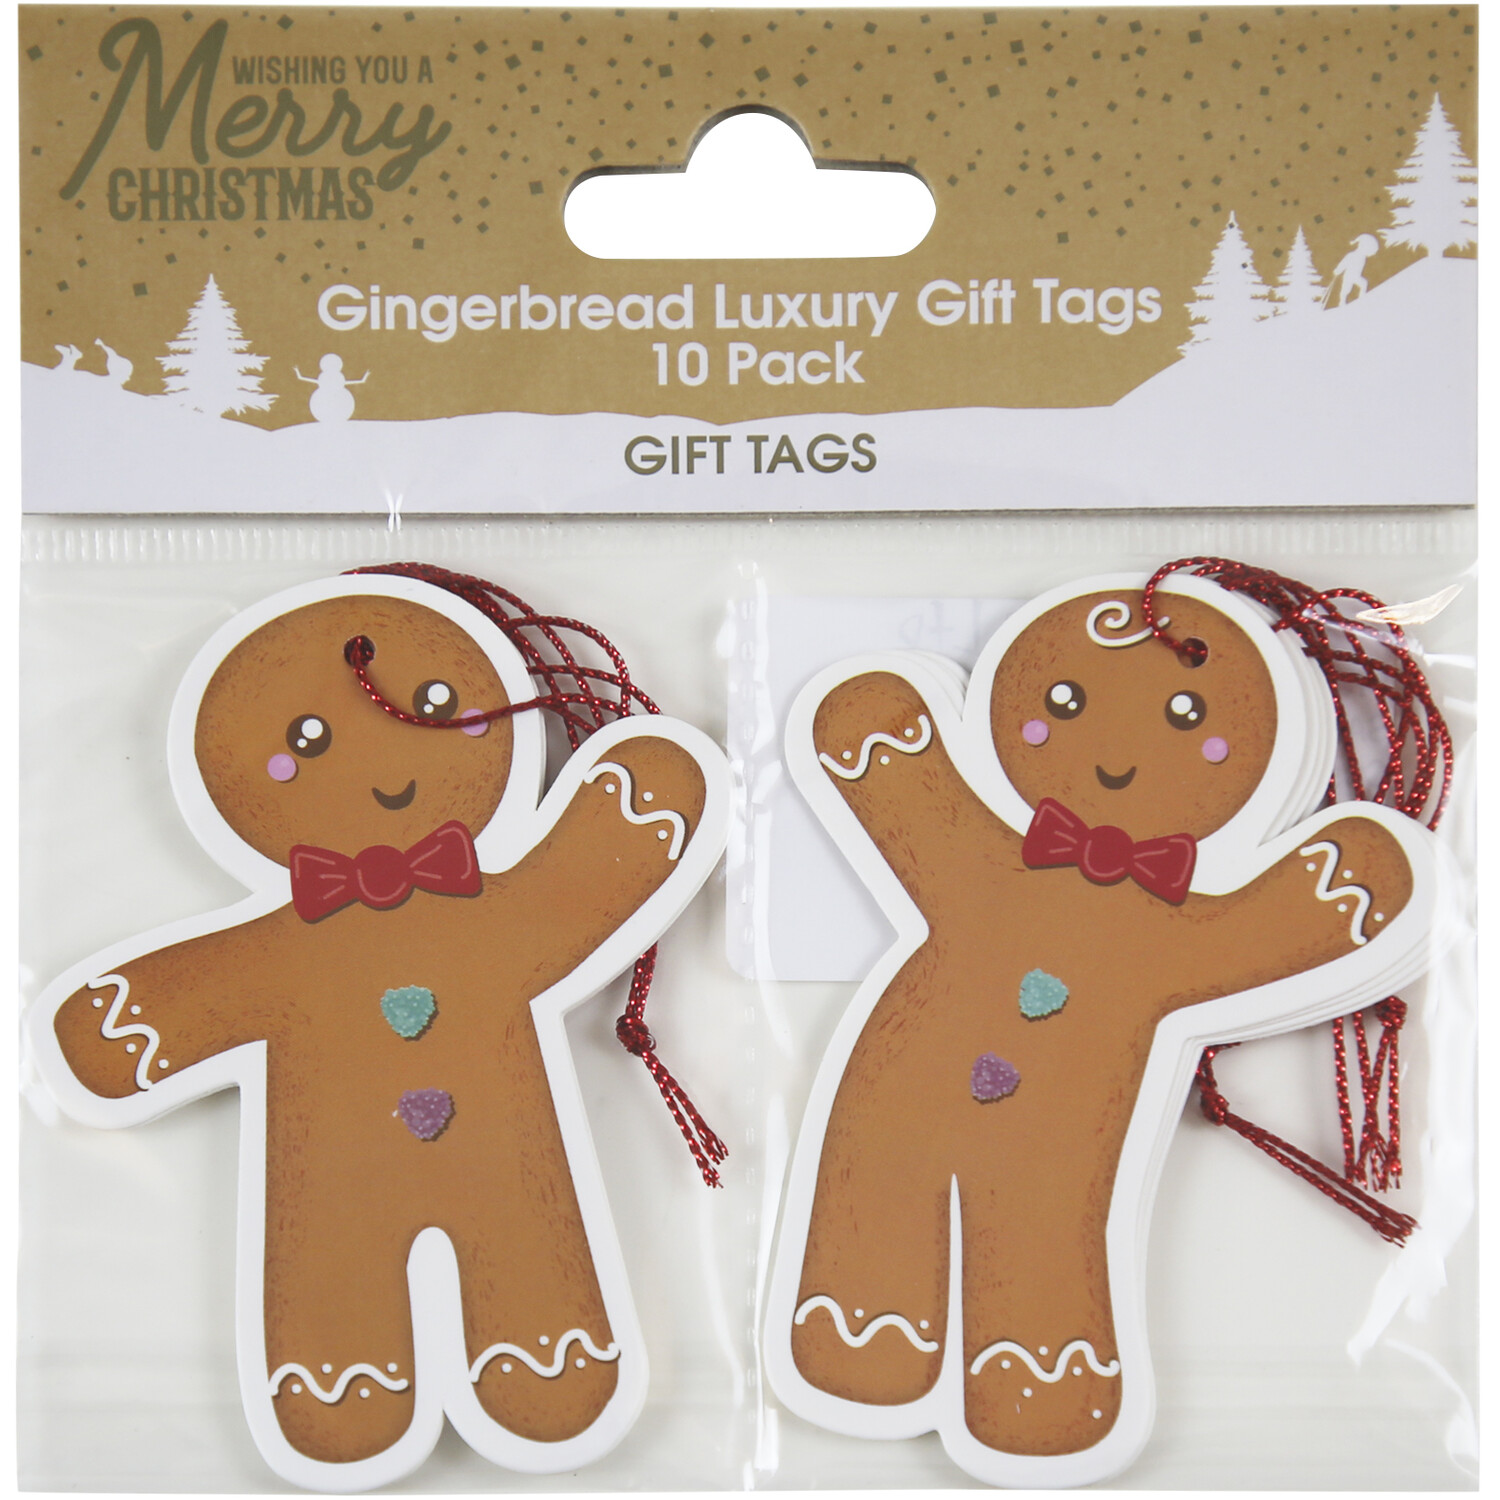 Pack of 10 Gingerbread Gift Tags - Orange Image